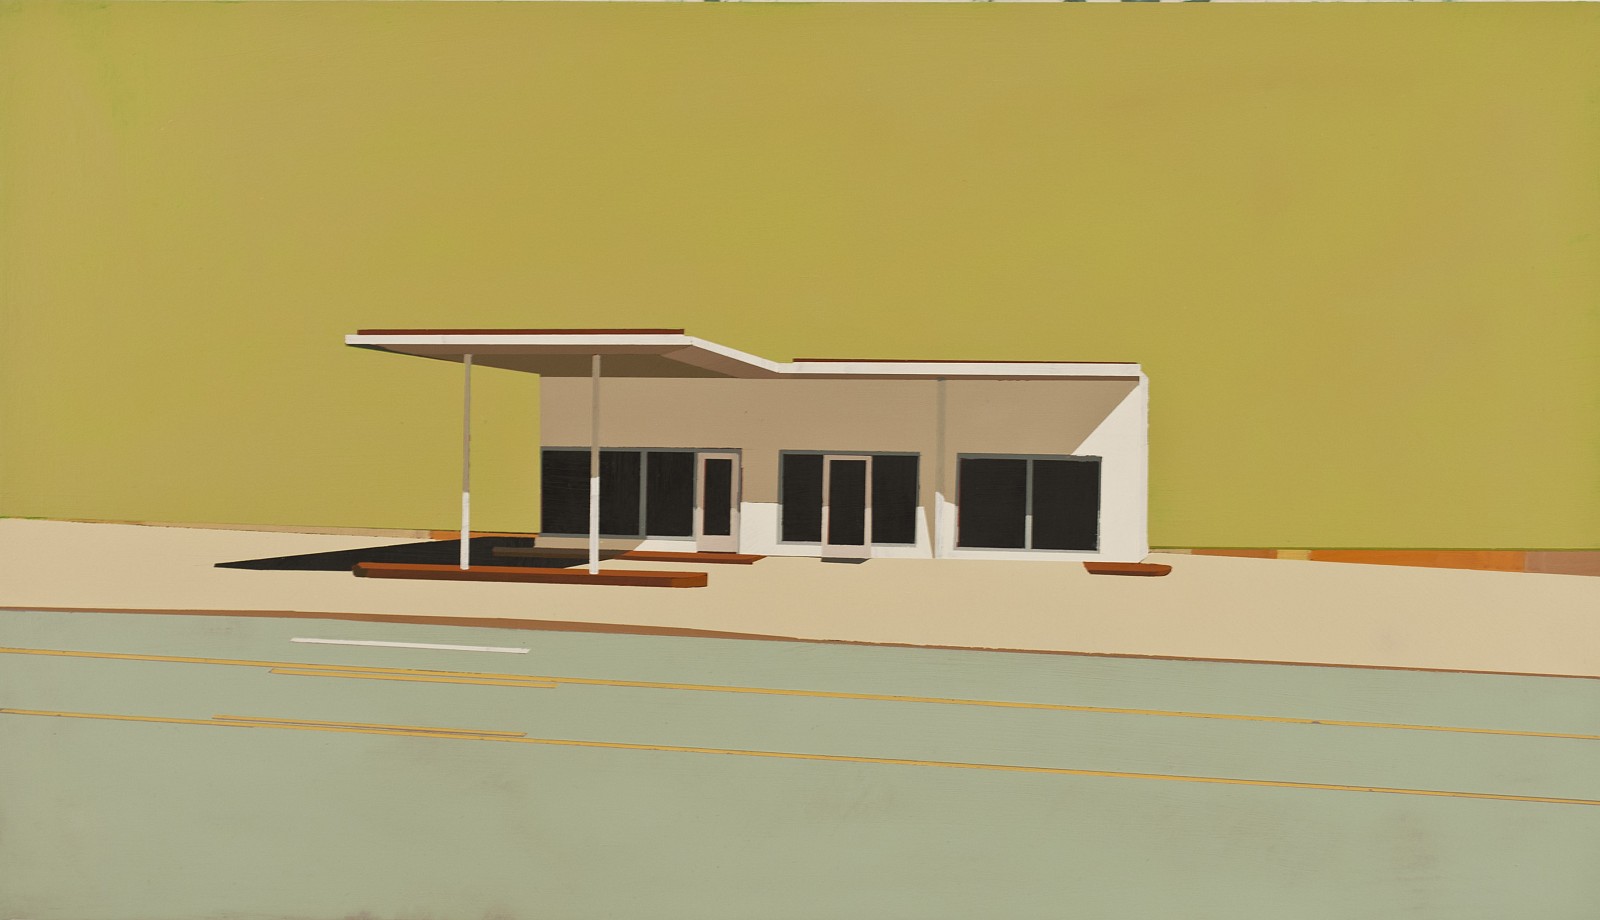 Mark Bradley-Shoup
Honey Suckle Bloom Gas Station in Sea Urchin, 2012
oil on panel, 12 x 21 in.